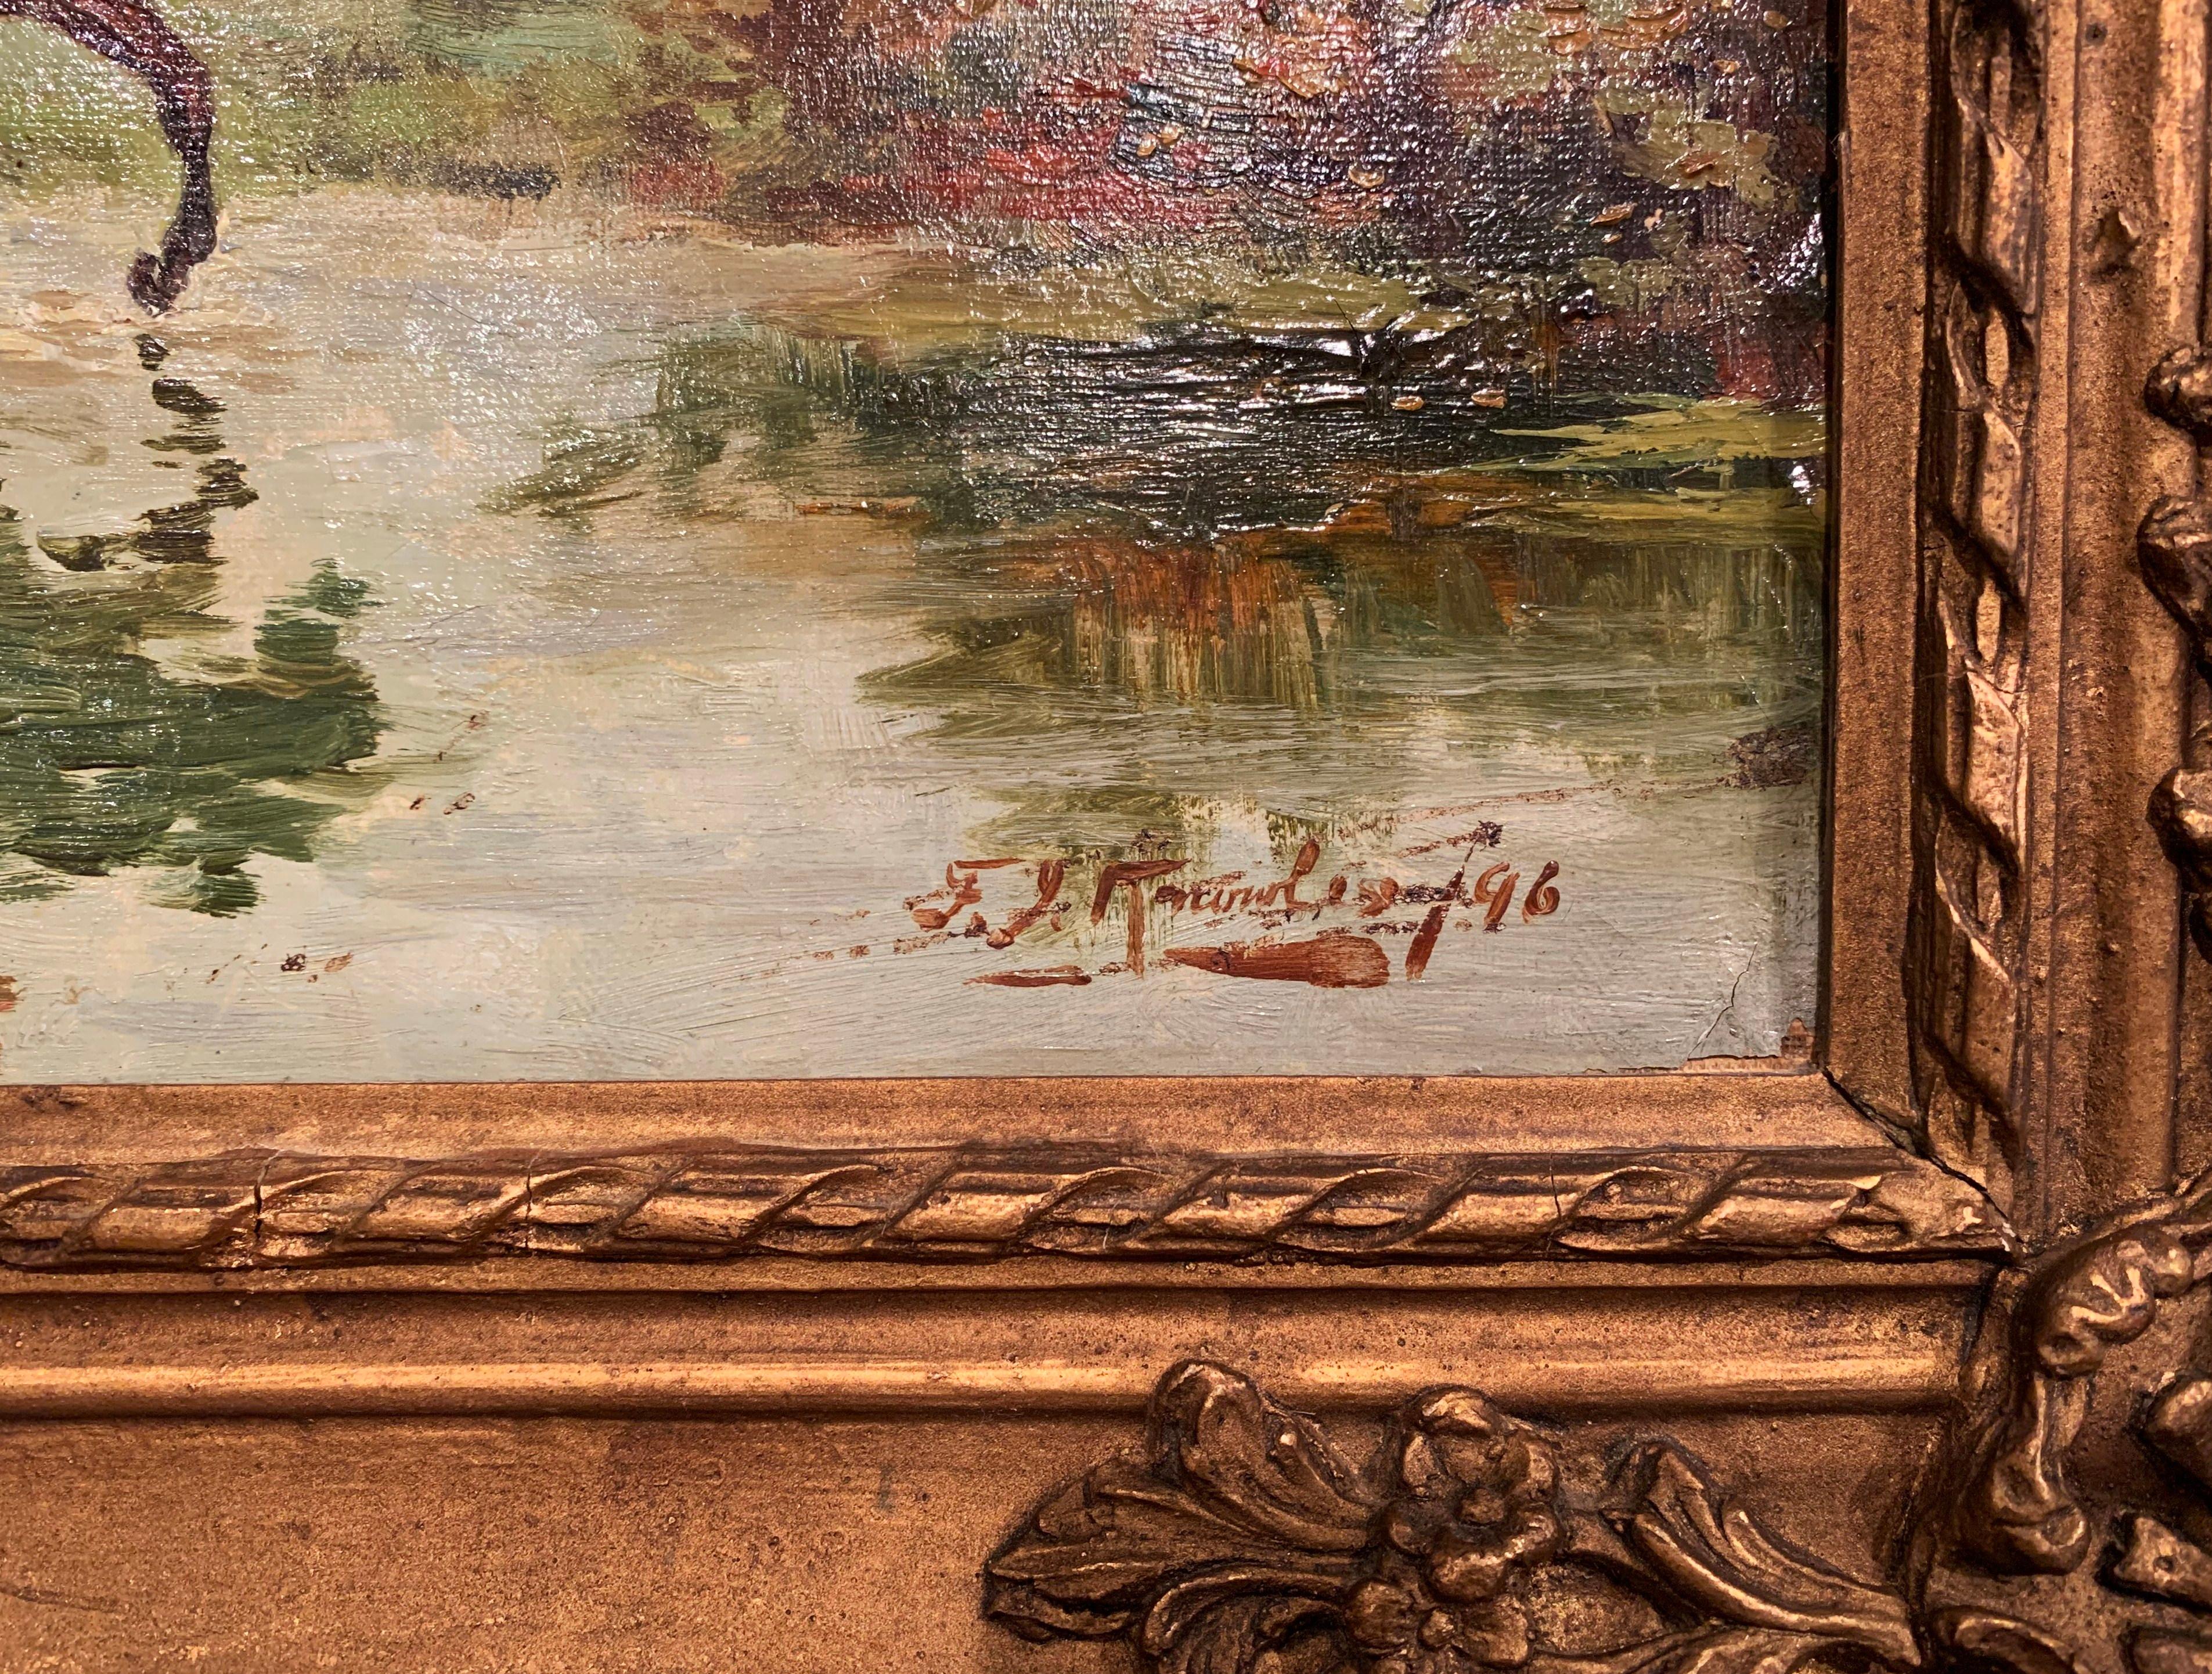 Transport yourself to the English countryside with this pair of 19th century oil on canvas paintings. Set in their original carved gilt frames, the scenes depict two hunt scenes with riders and horses on a hunt. Both of the classic artworks are